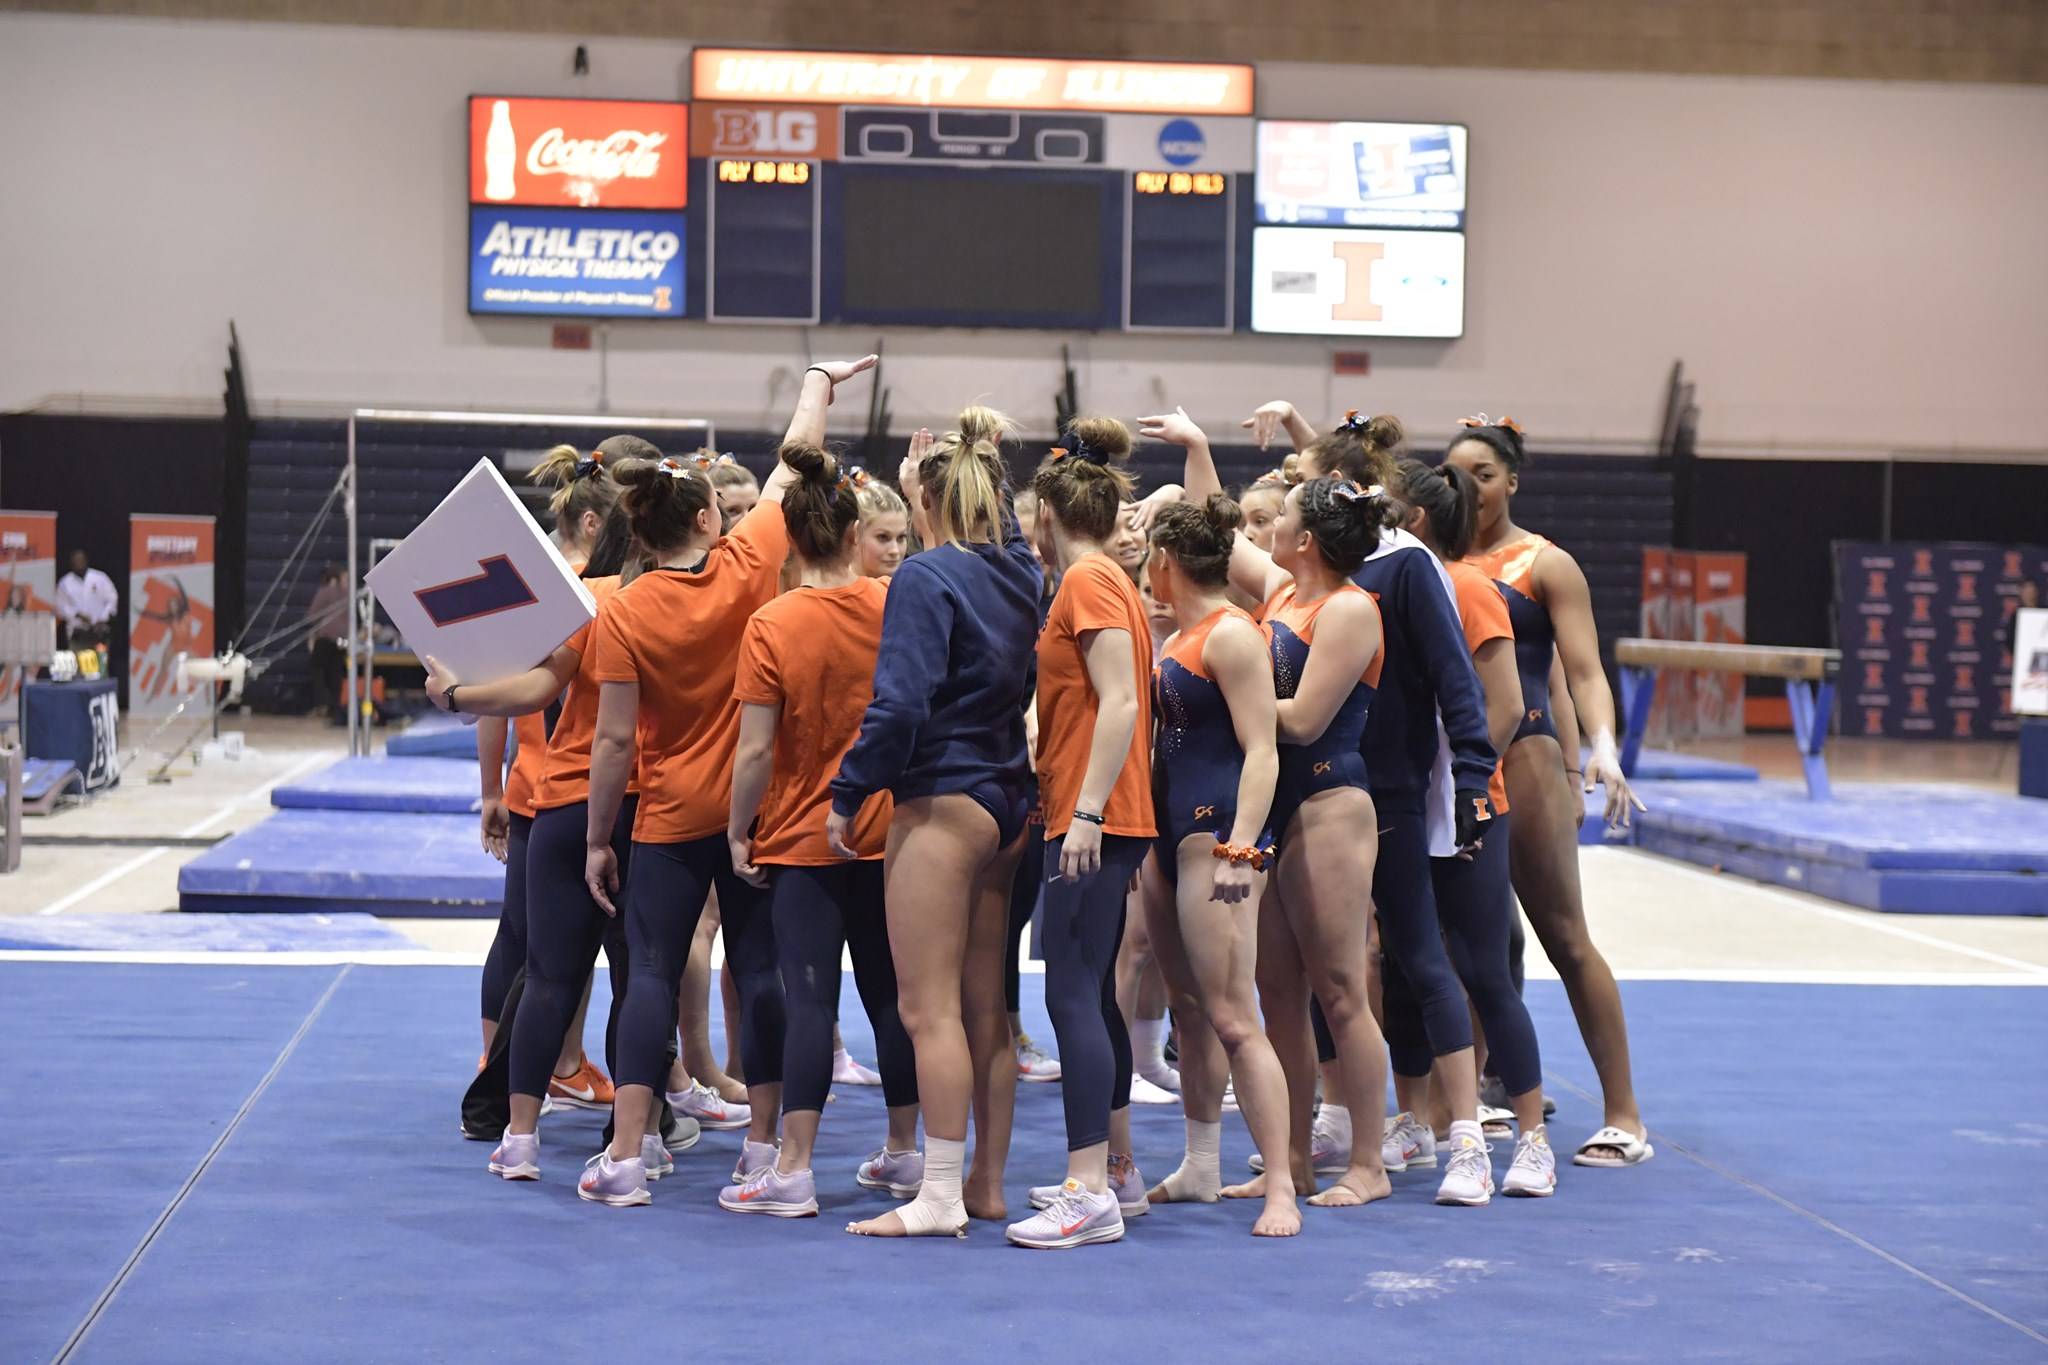 A huddle of the University of Illinois womenâ€™s gymnastics team standing on a blue mat with their backs to the camera. A few of them have their arms in the air. They are standing in a gym space, and a score board is visible on the wall in the back. Photo from the Illini womenâ€™s gymnastics vs. Central Michigan Facebook event page.